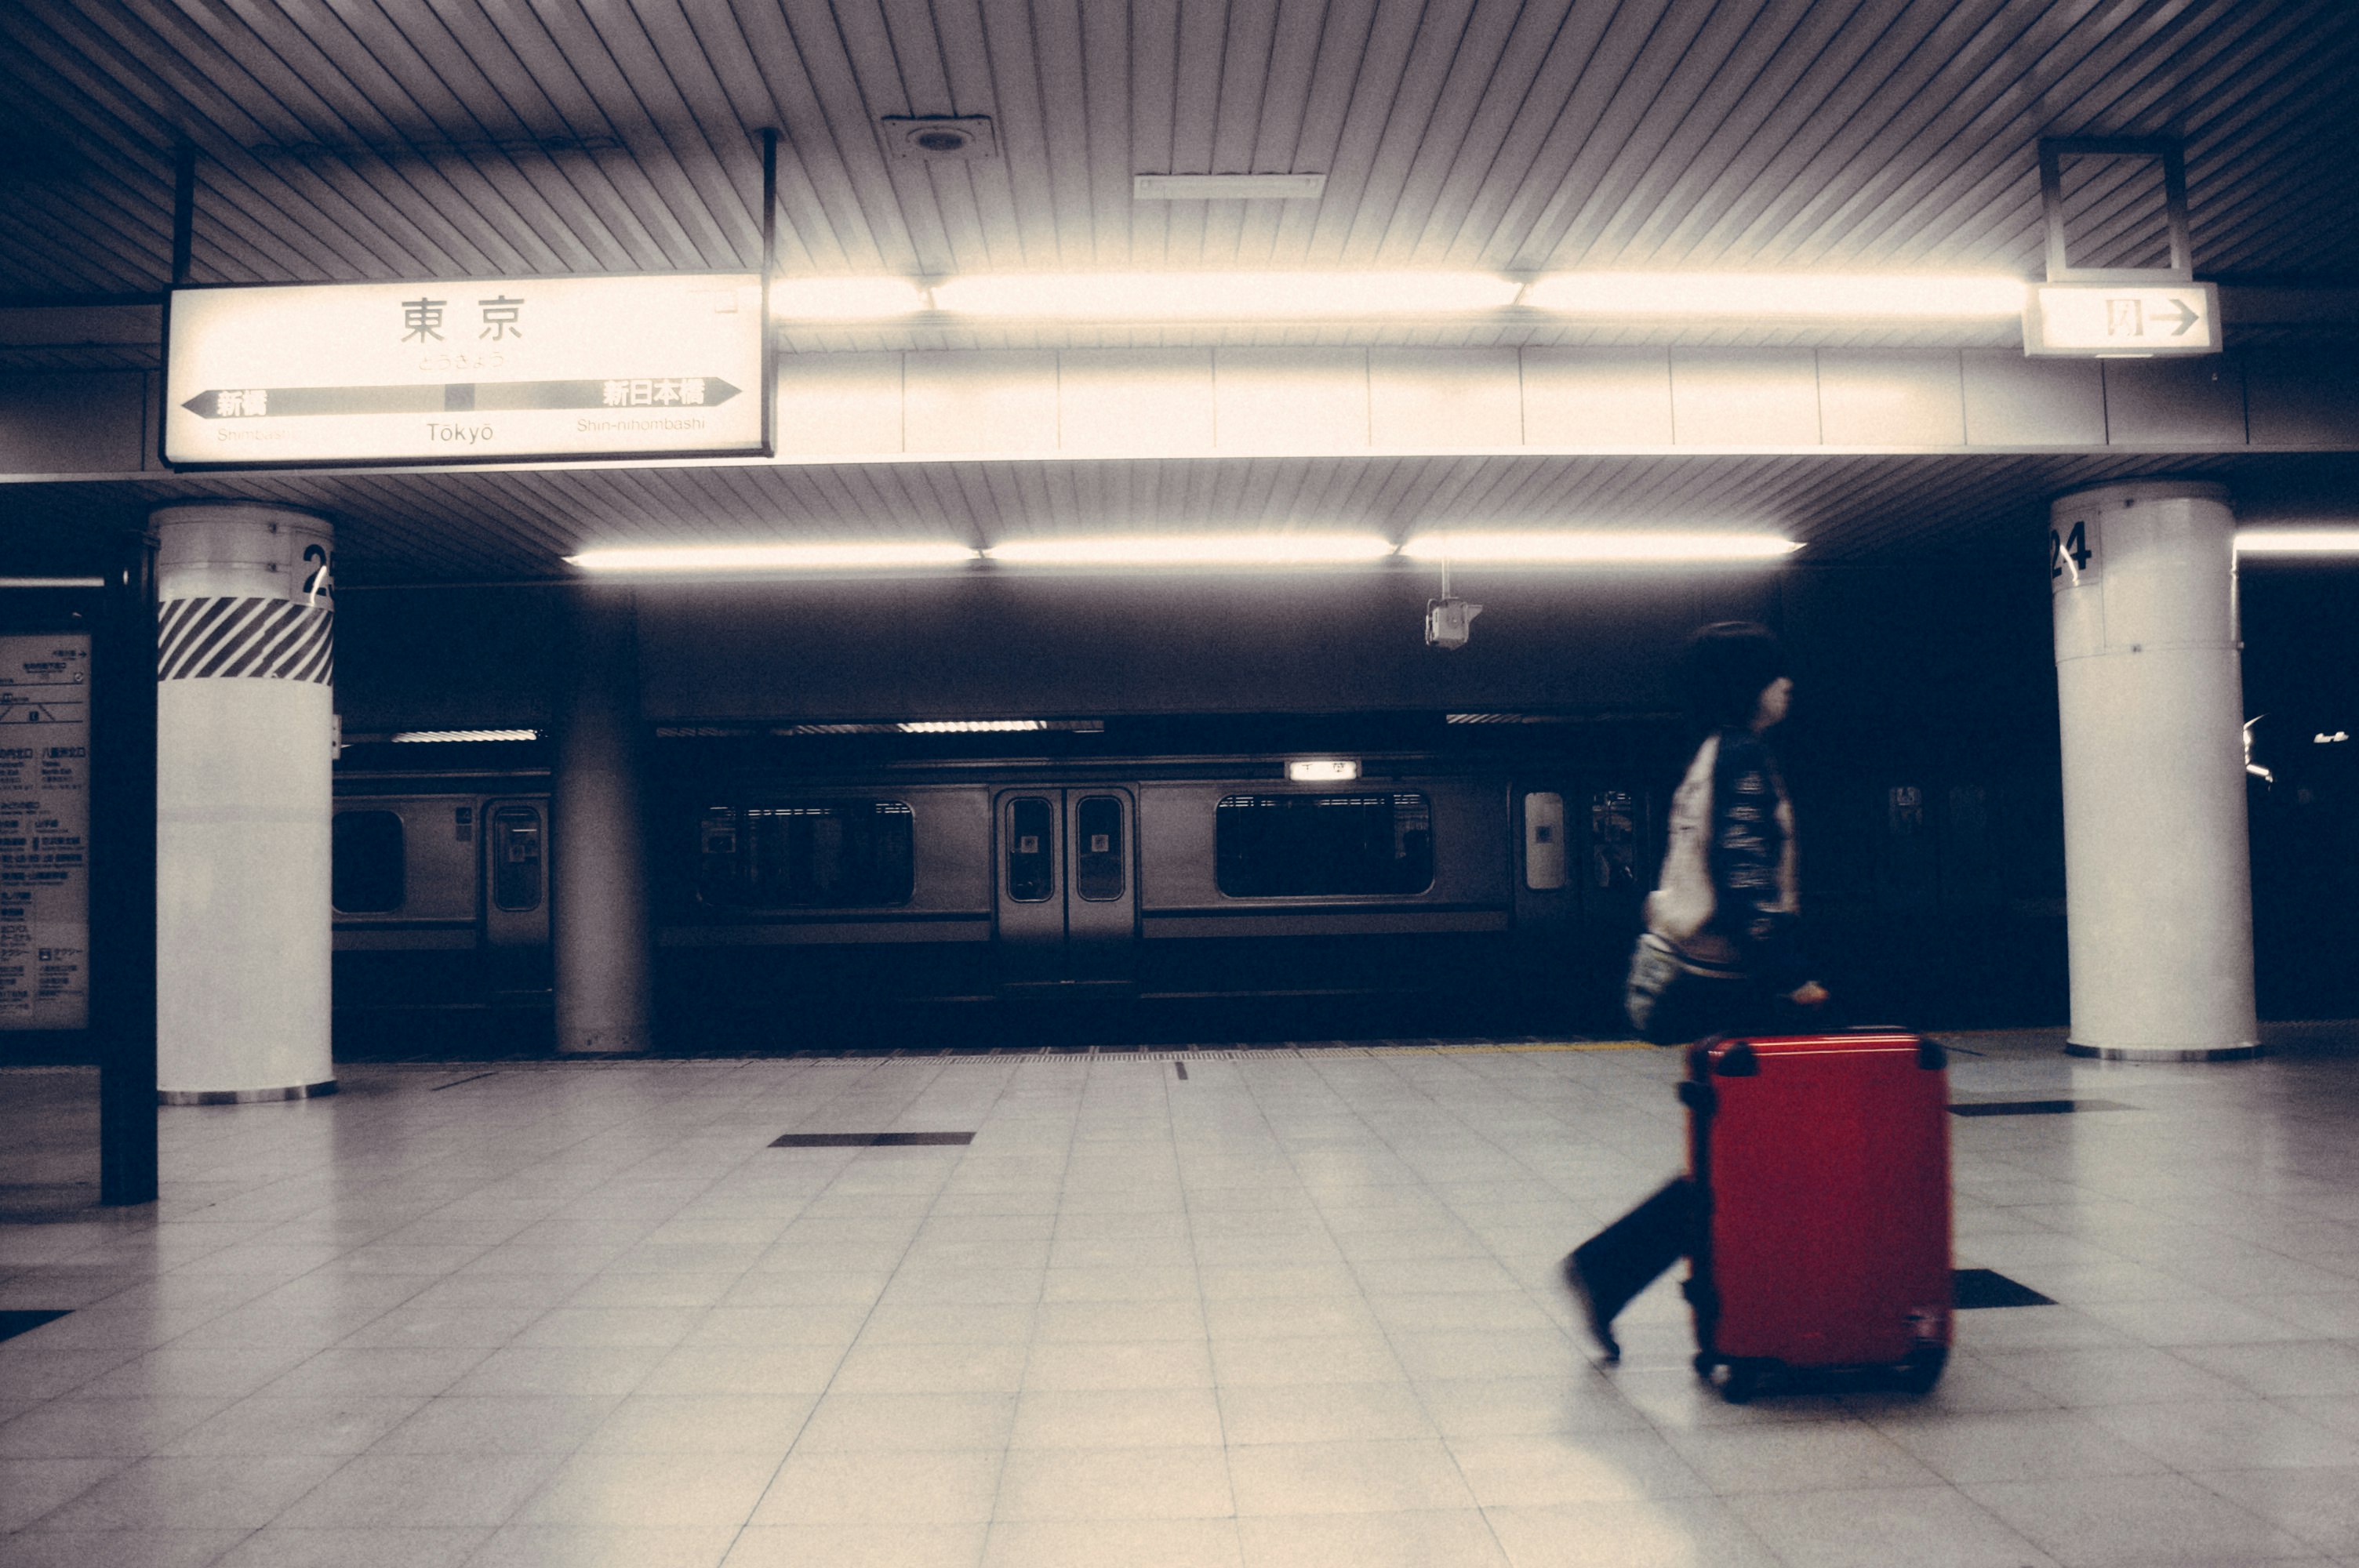 person walking with luggage bag near train inside the building